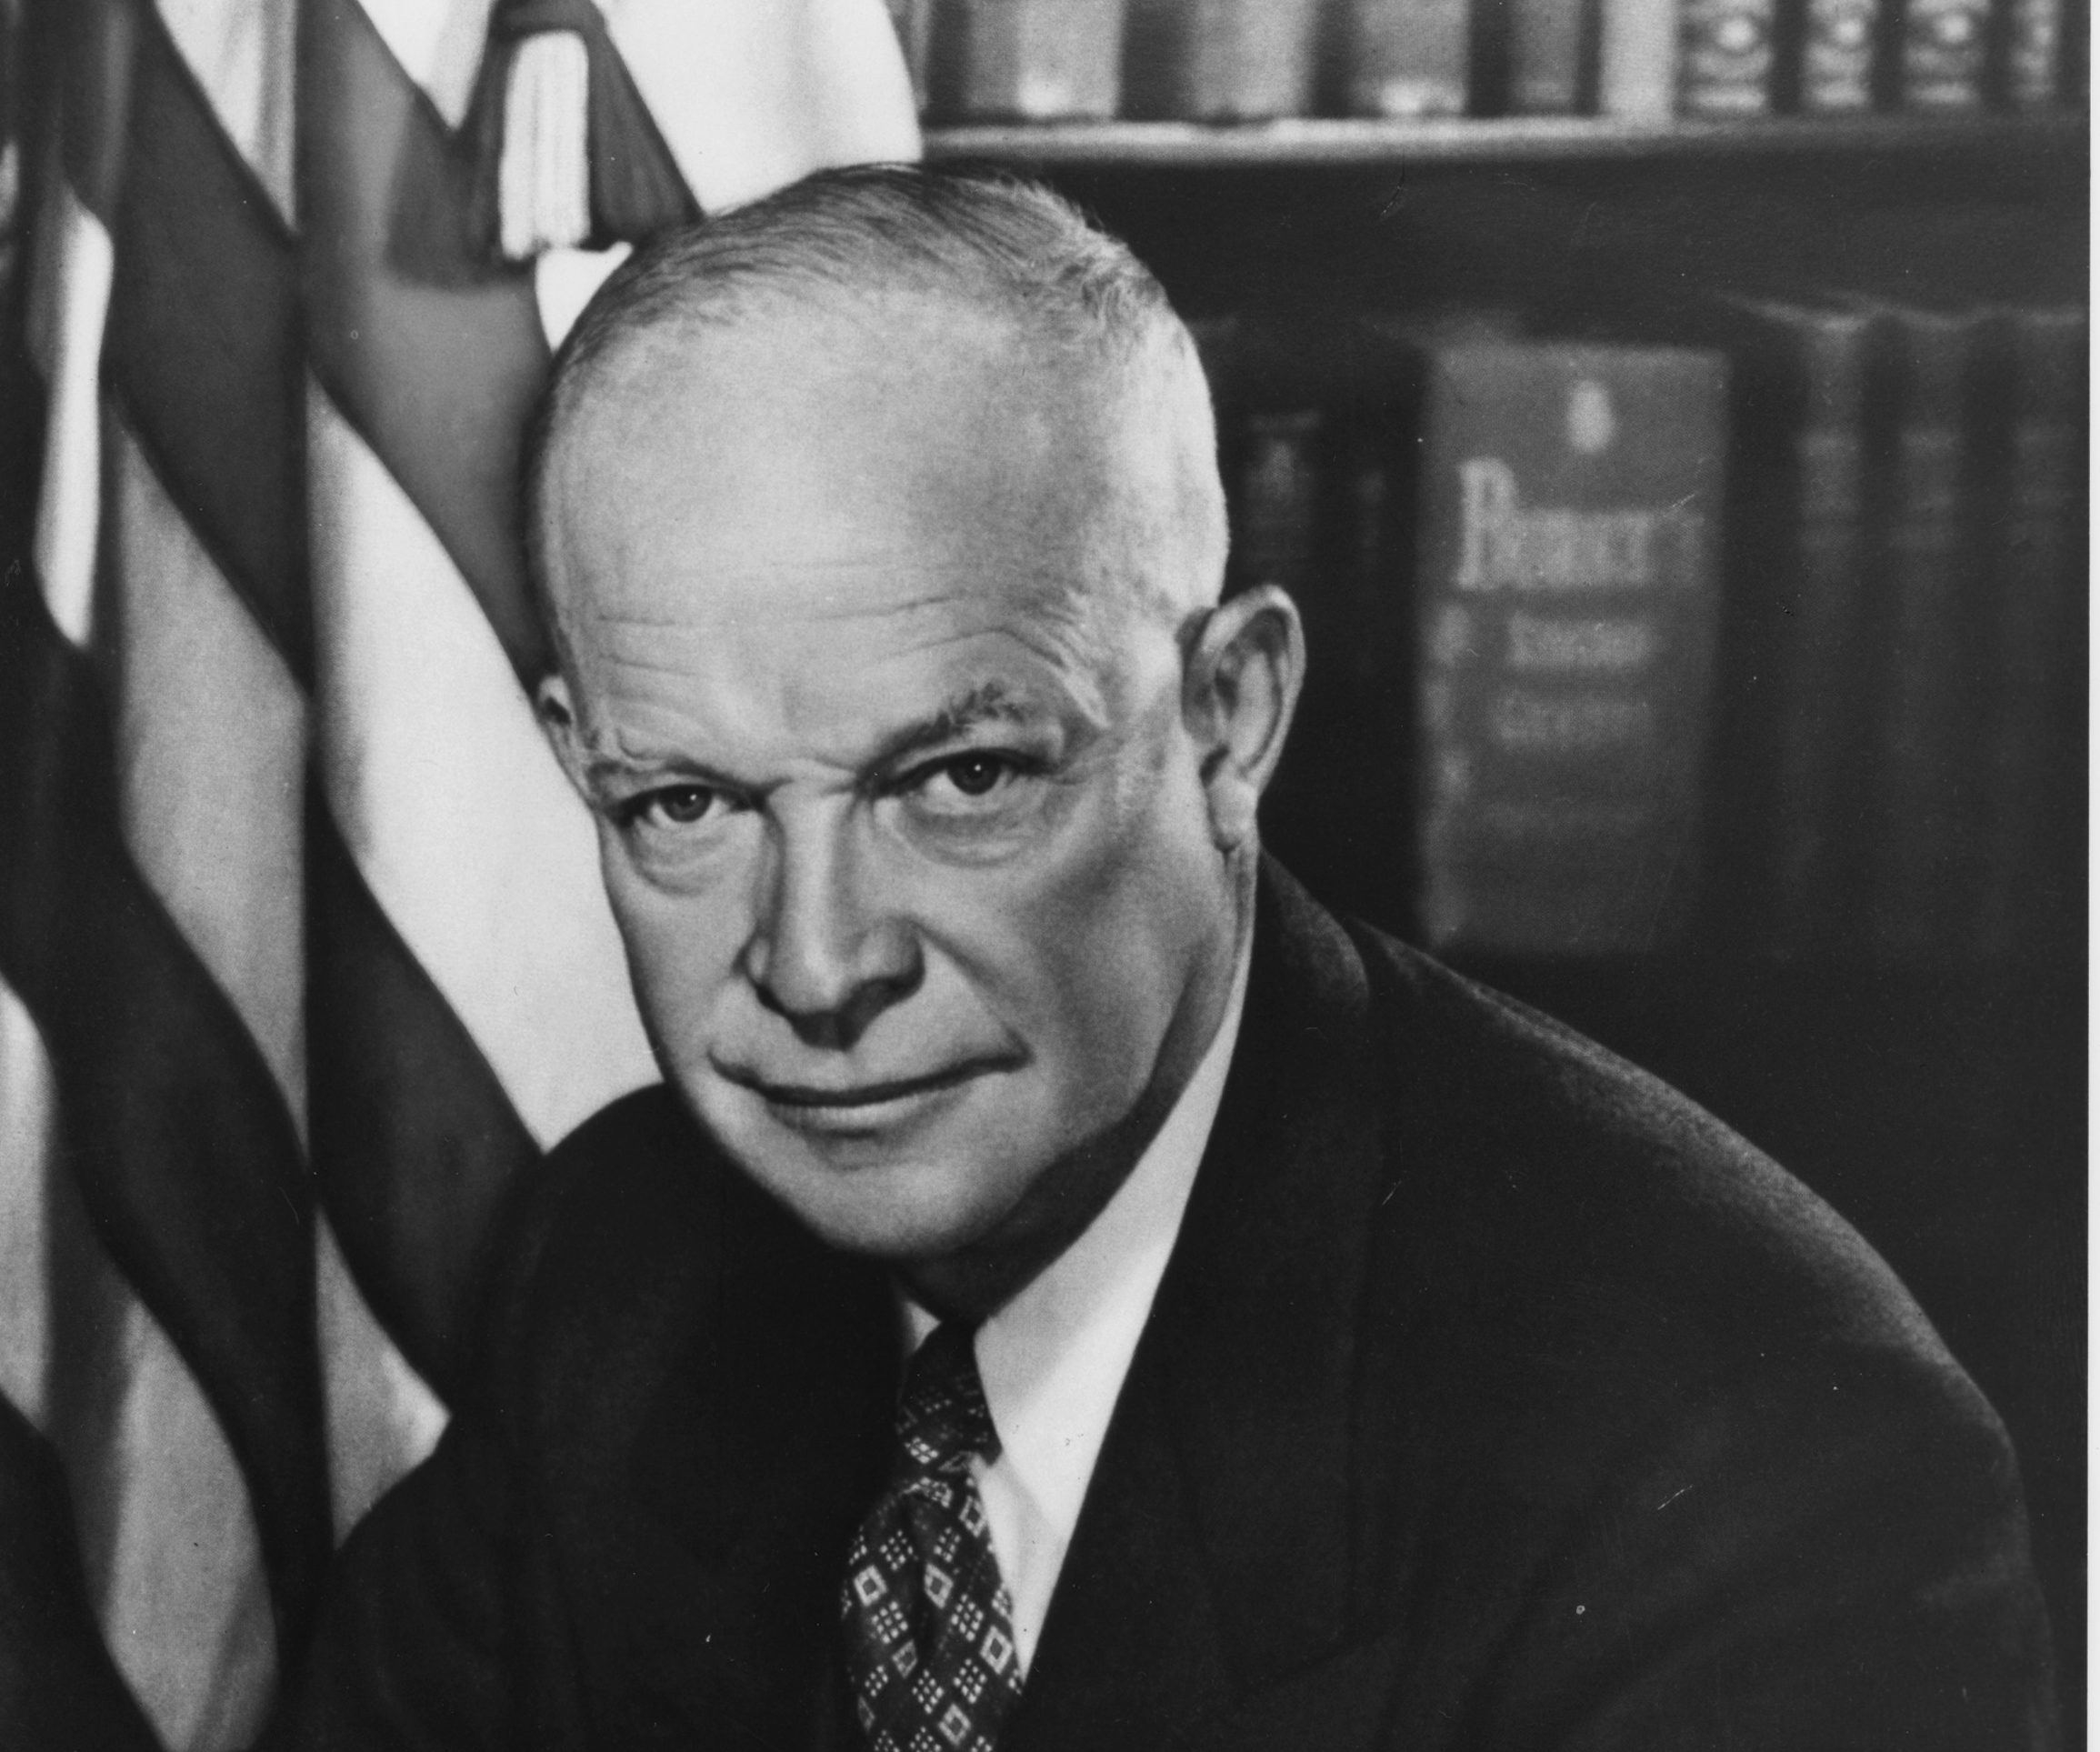 The Gentle Shape of Deceit: Eisenhower's Rhetoric in Randy Fowler More Than a Doctrine - Book Review